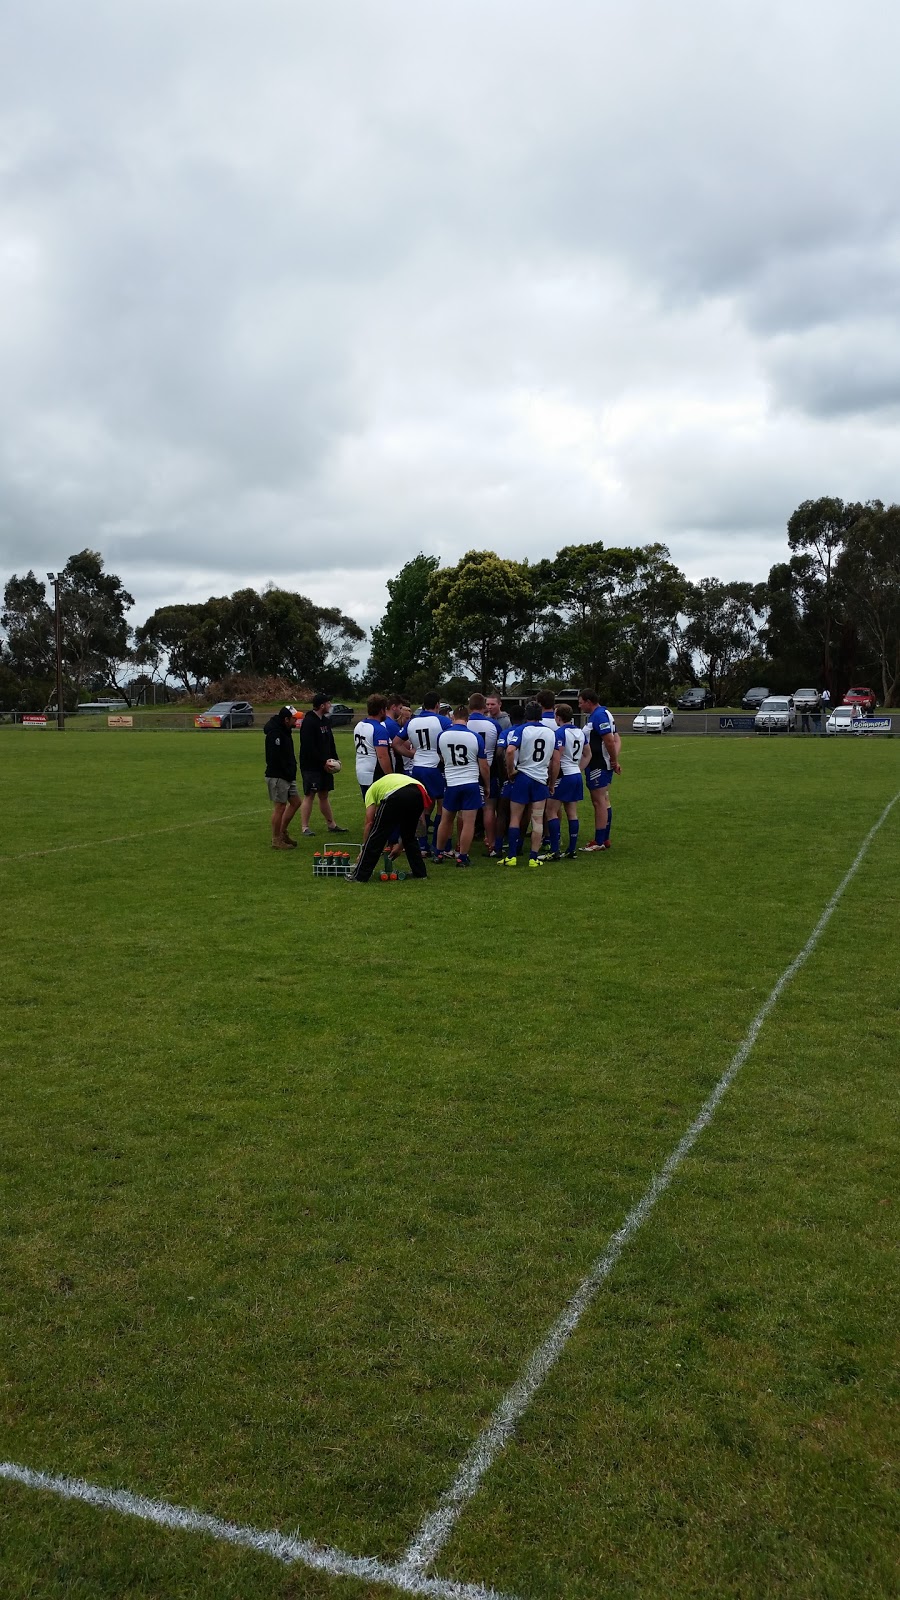 Blue Lake Knights Rugby League Club | university | 50 White Ave, Mount Gambier SA 5290, Australia